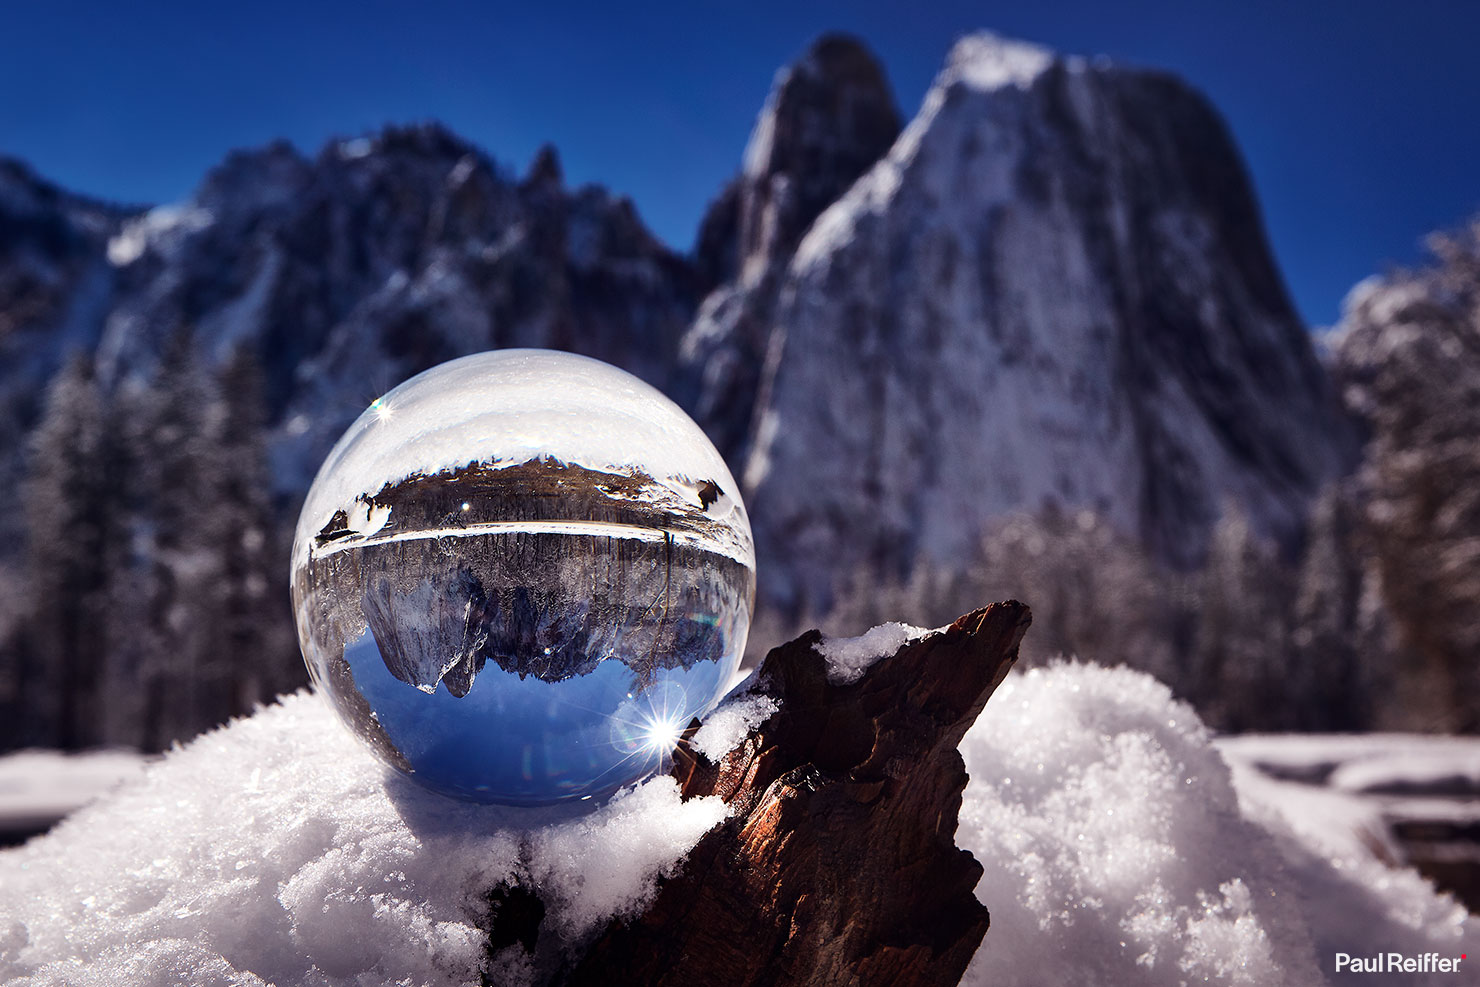 Lensball Yosemite National Park Cathedral Rock Winter Snow Paul Reiffer Sphere Fisheye Lens Ball Rollei Tiny Planet World Photography